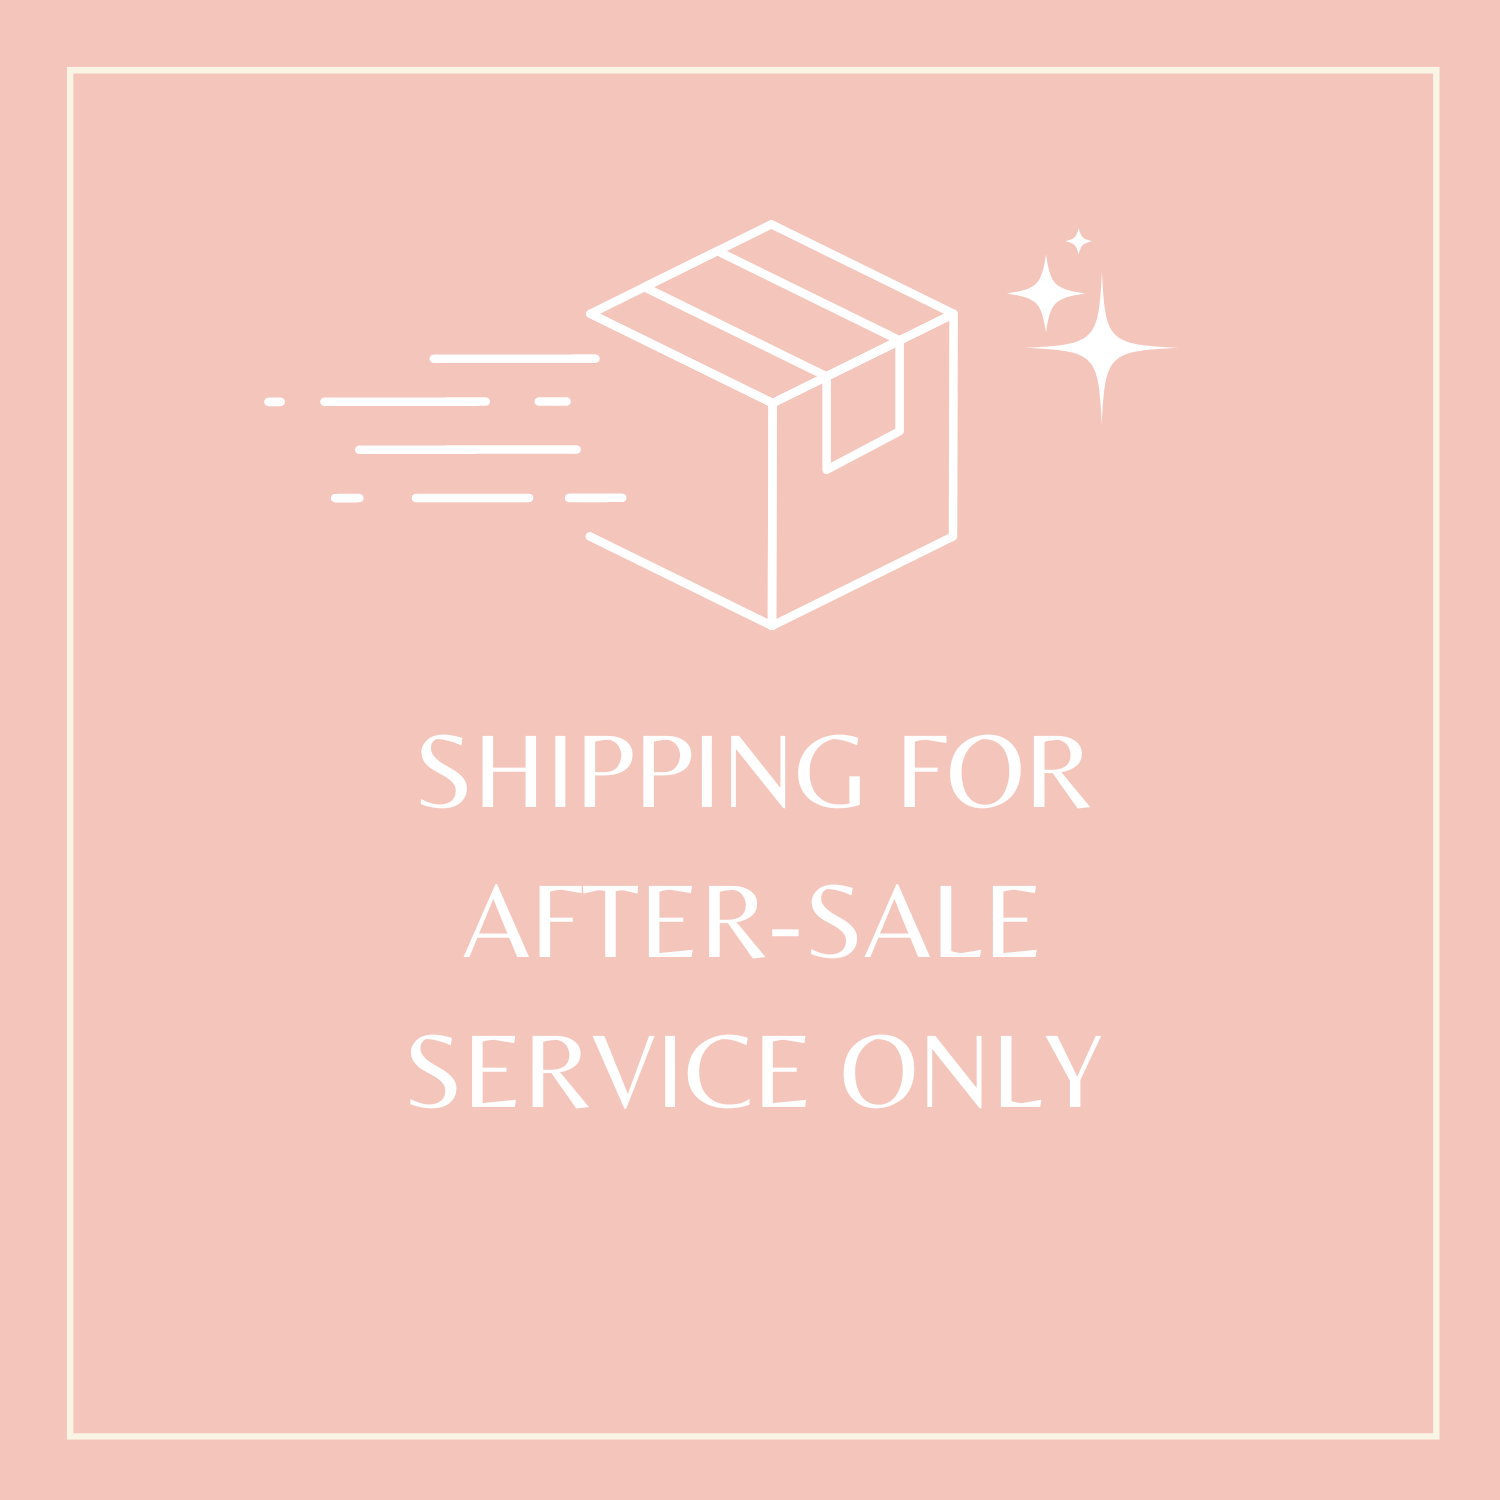 SHIPPING FOR AFTER-SALE SERVICE ONLY 3